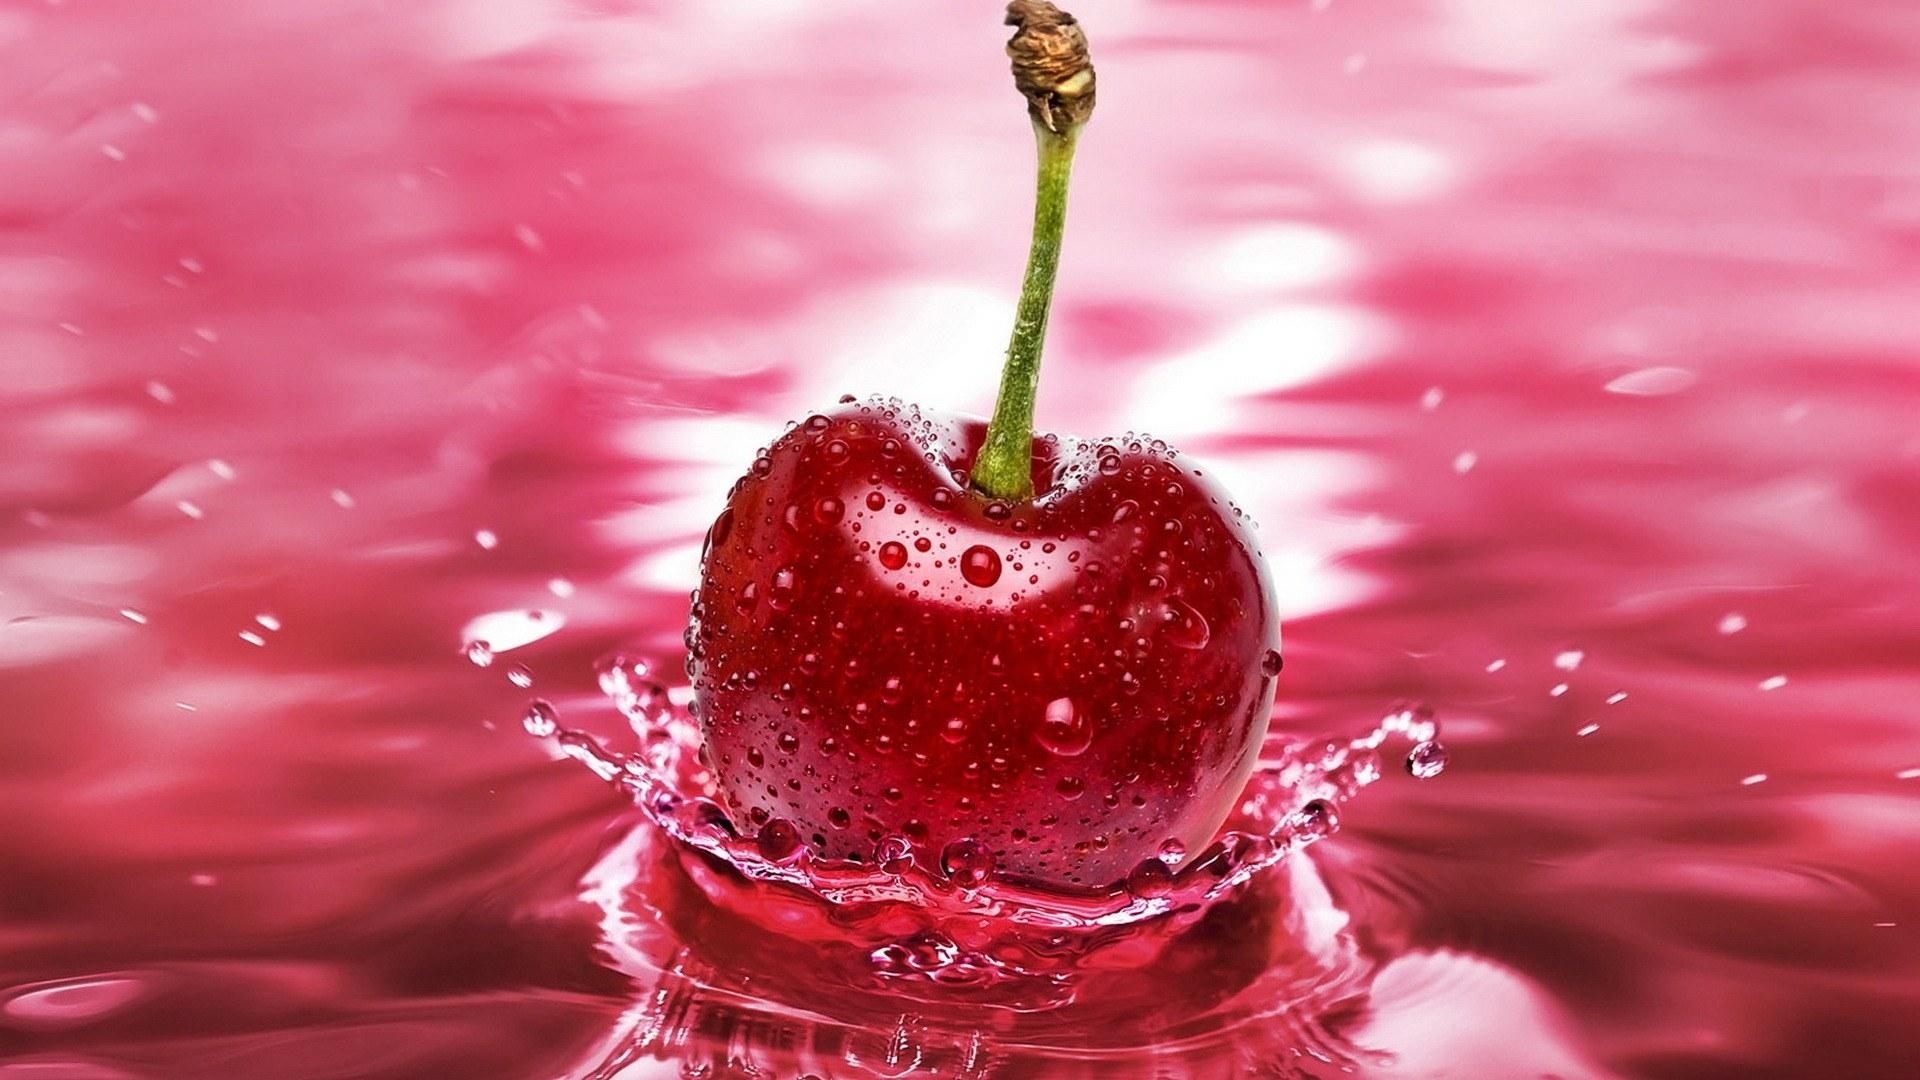 fruits, drops, water, food, cherry, red Full HD